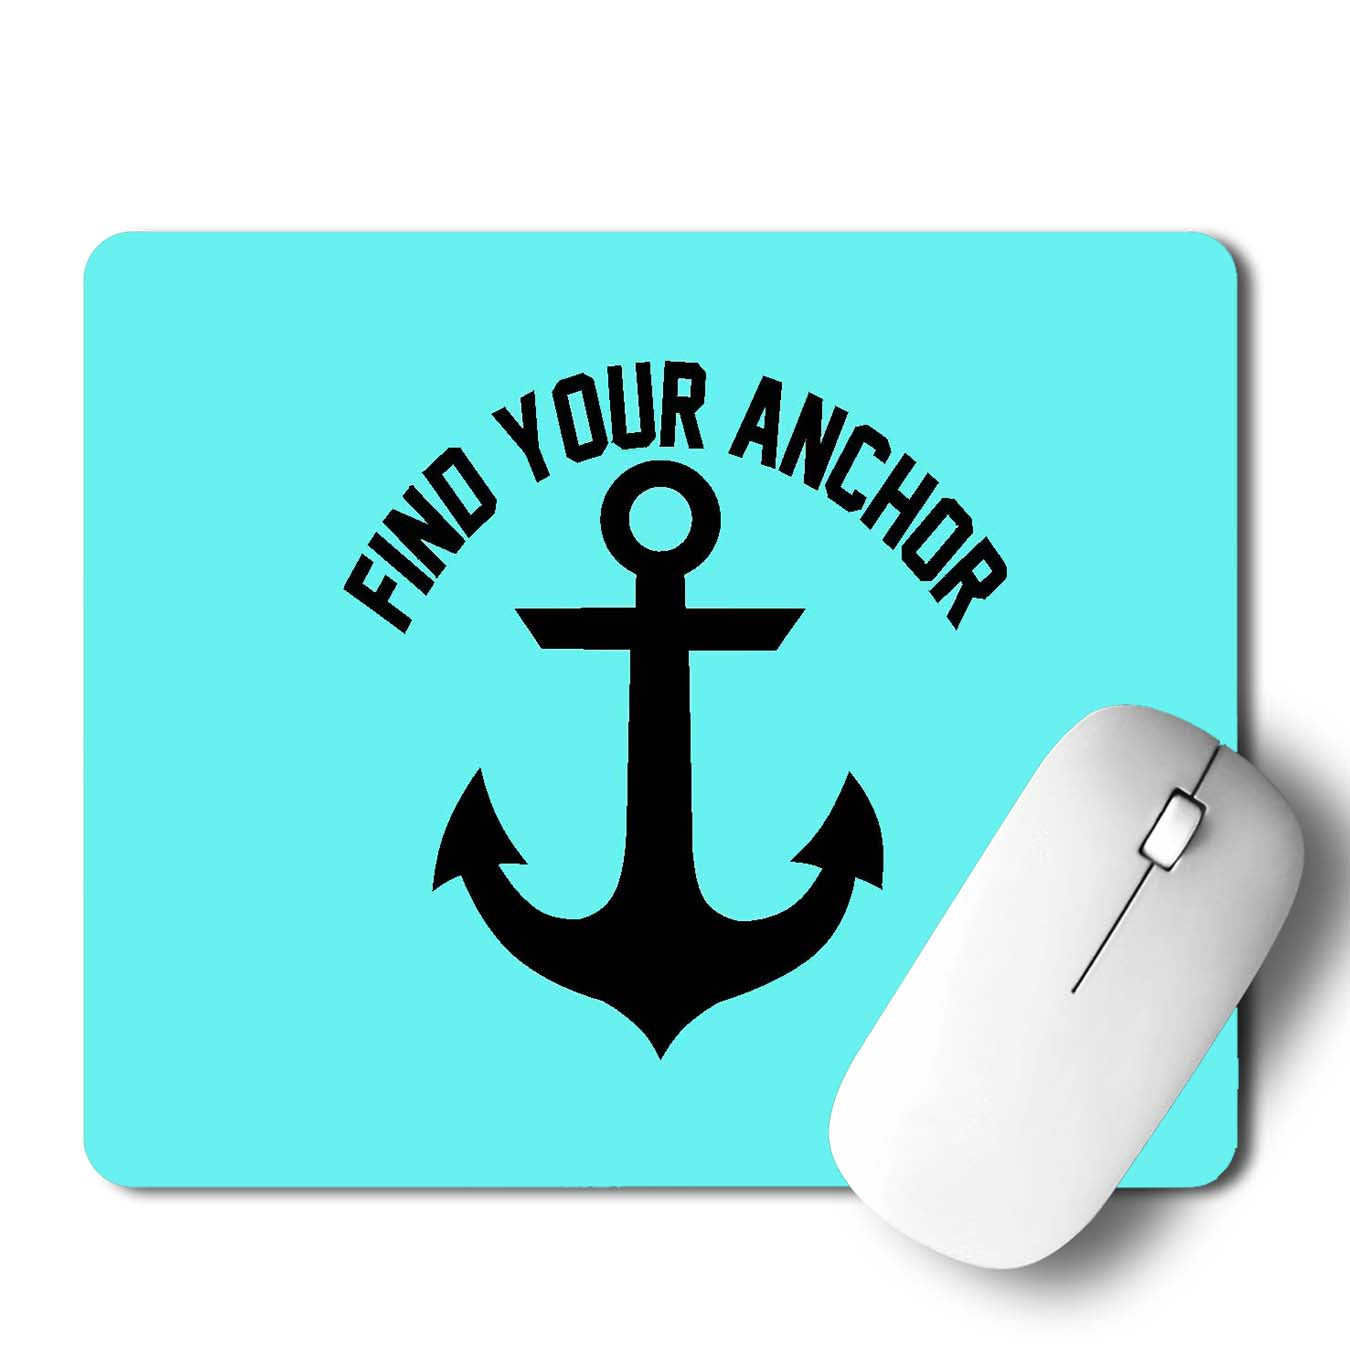 Find Your Anchor  Mouse Pad